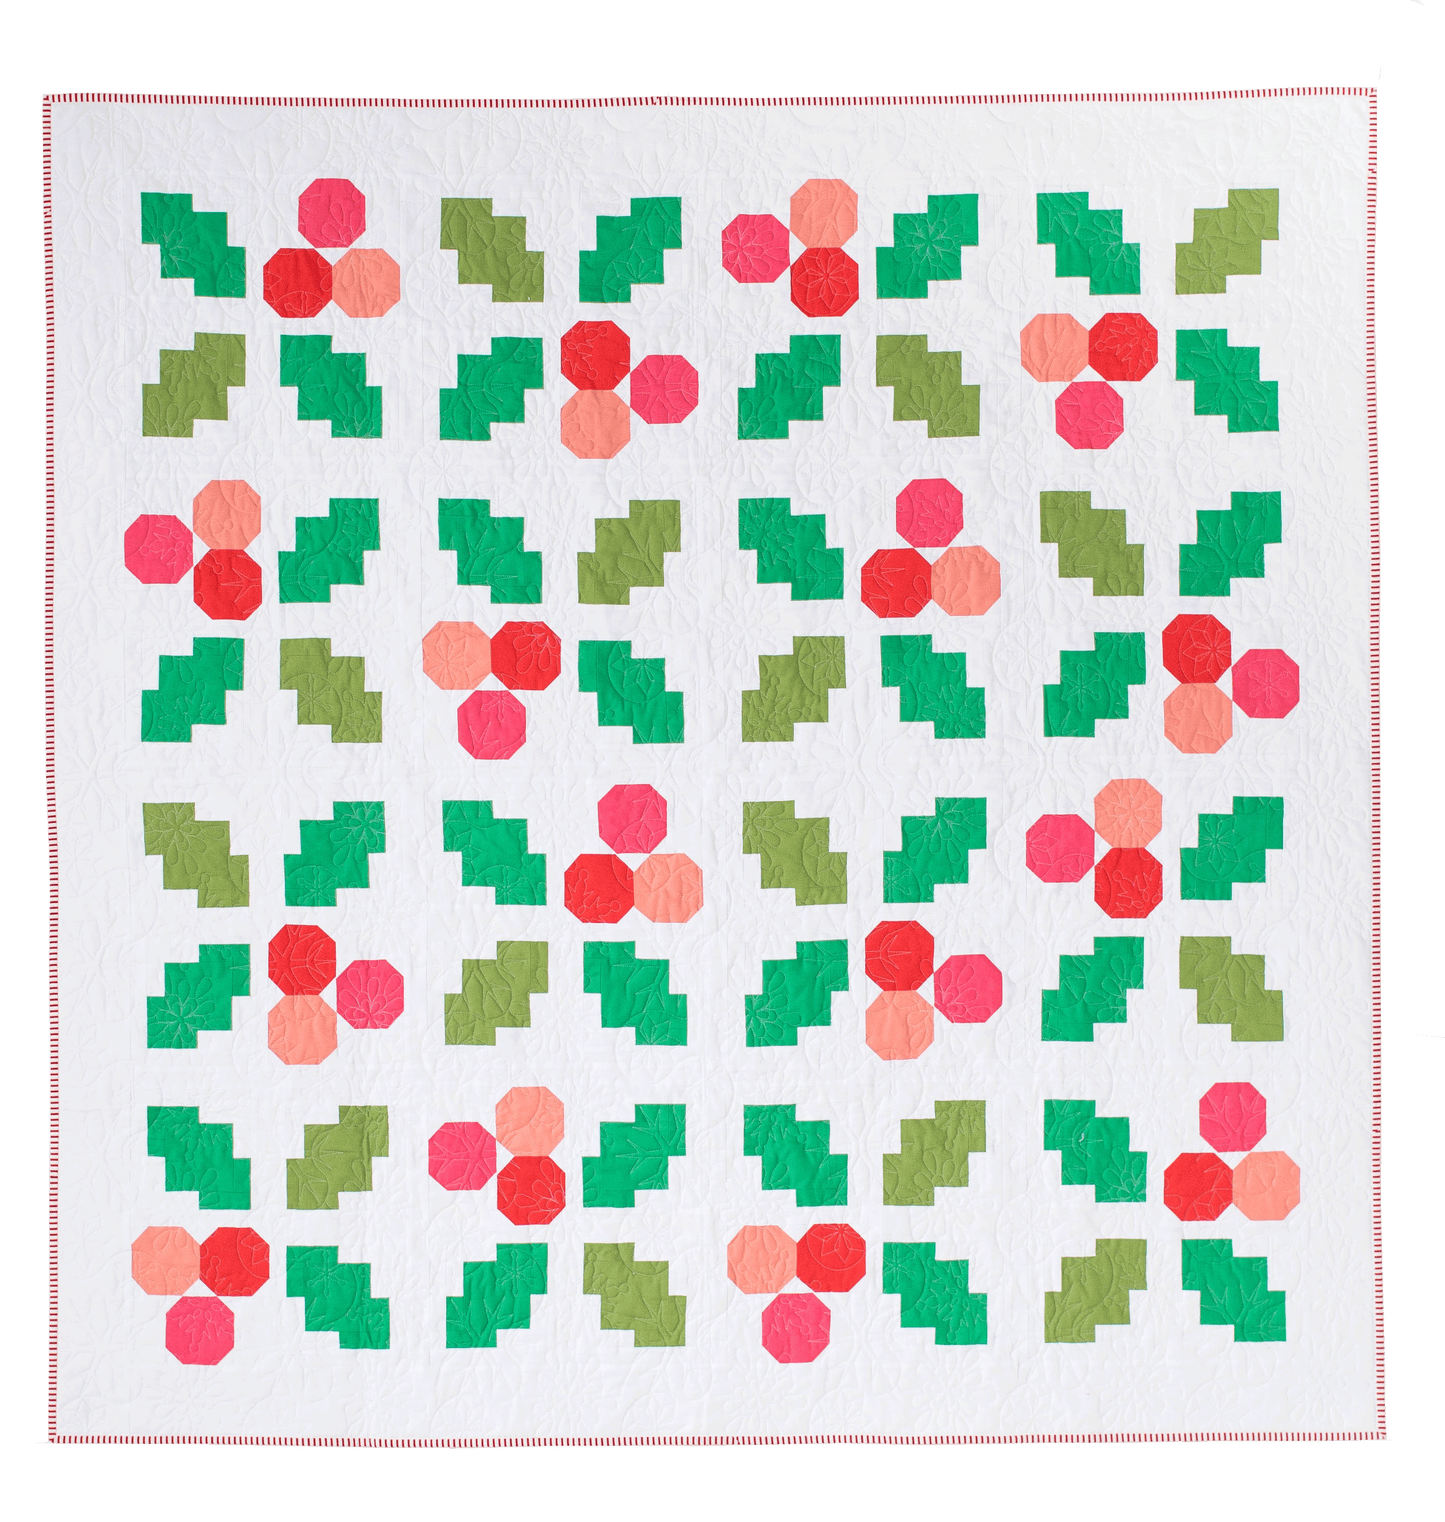 Holly Jolly Quilt Pattern - PDF